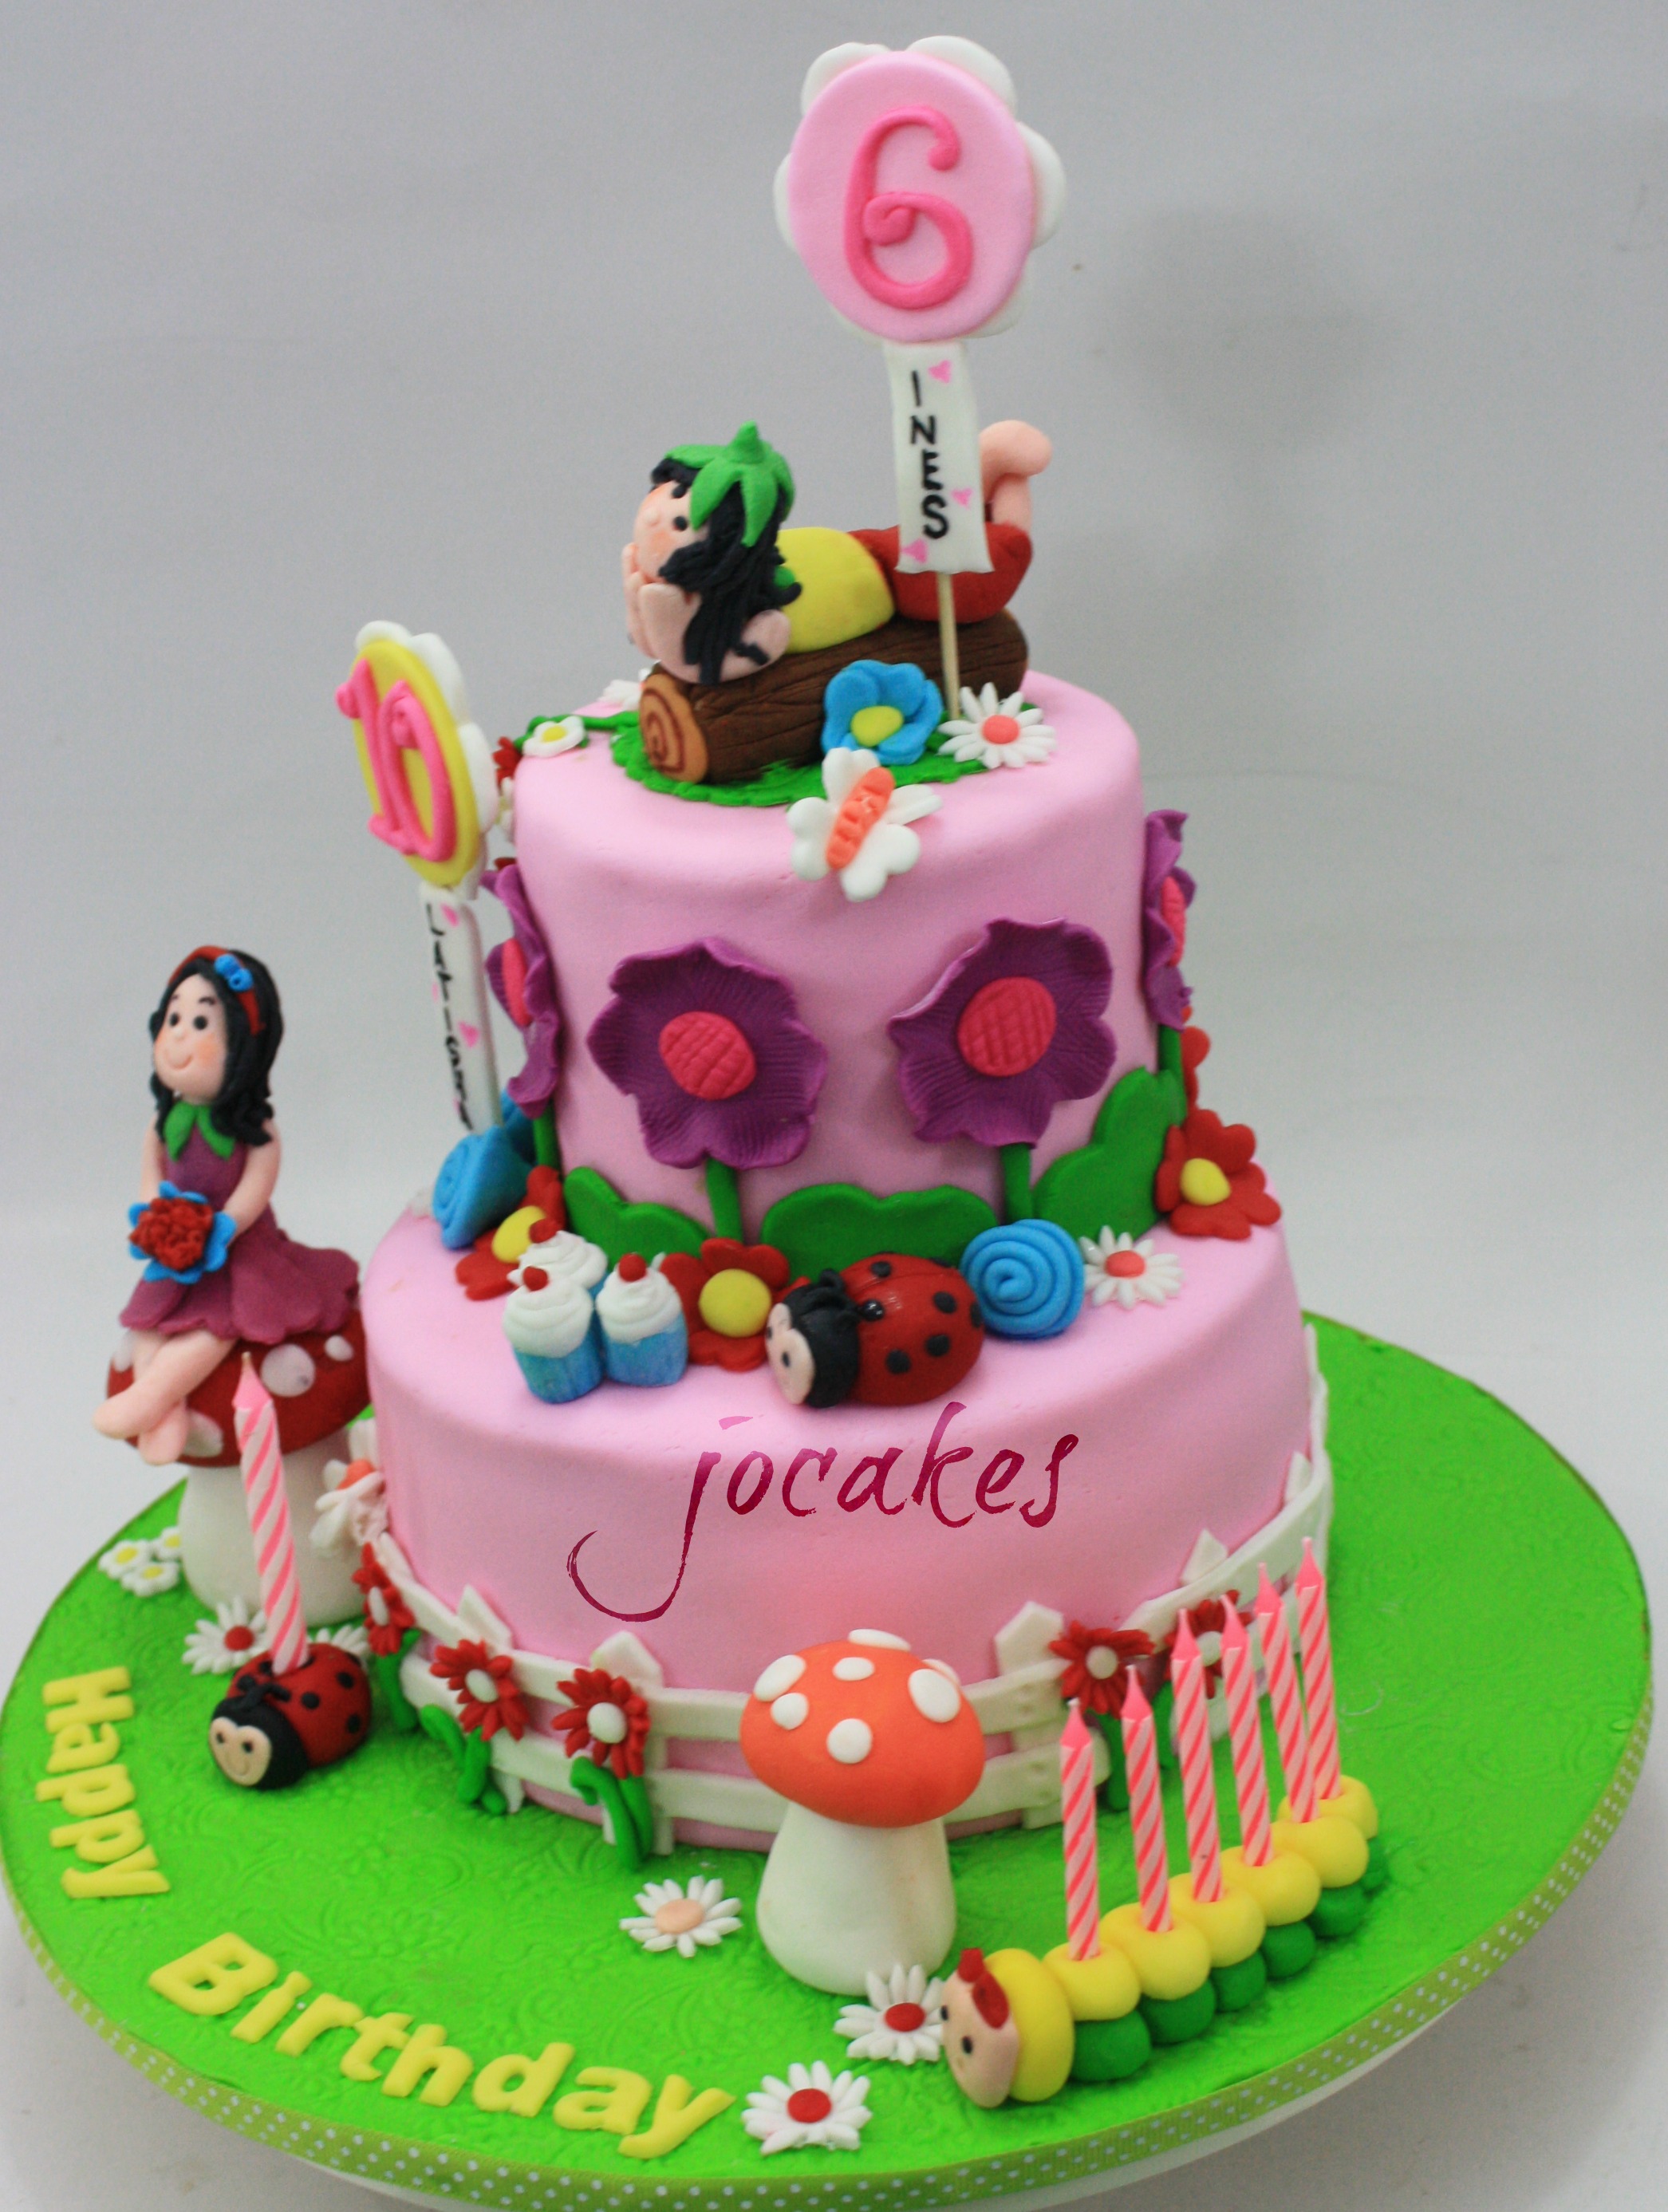 Six year old Birthday cake | Pool Party | Pinterest